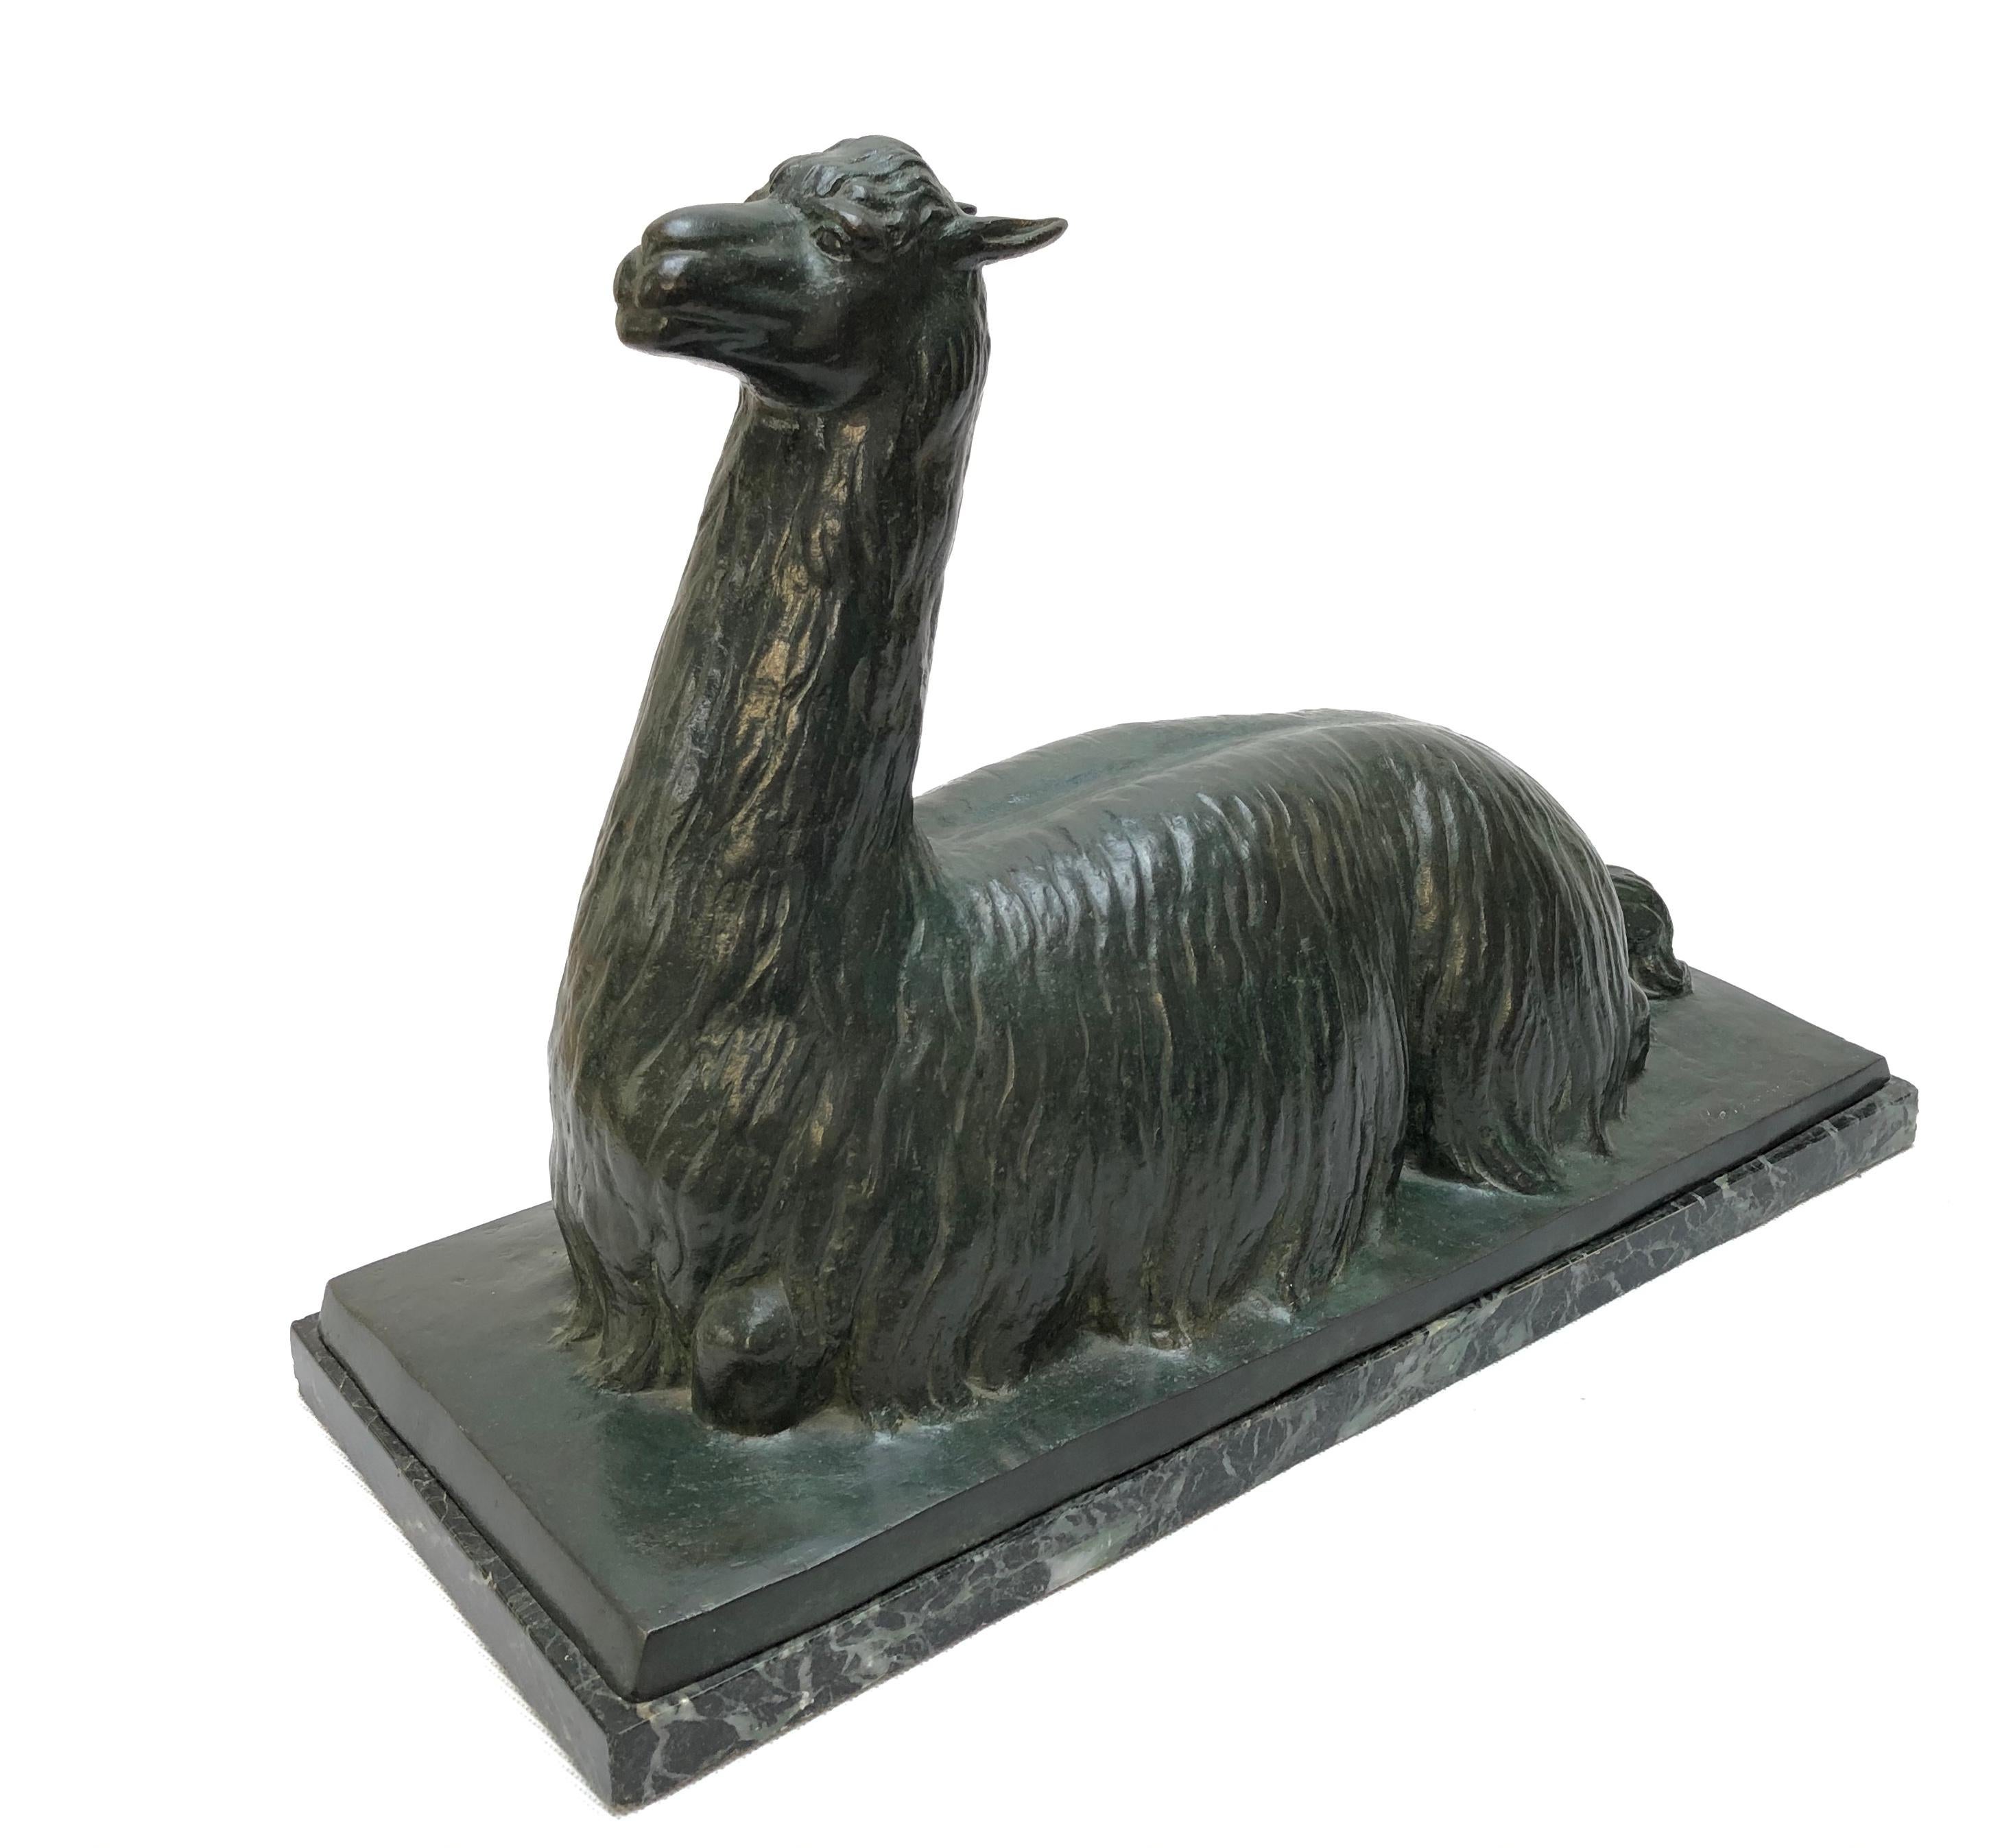 An unusual 20th century South American bronze model of a Llama
Depicted lying down on a rectangular base and Verde Antico green marble plinth, signed Respinoza C. and with foundry stamp inscribed Fundicion Campaiola
Measures: 33cm high, 47cm wide,